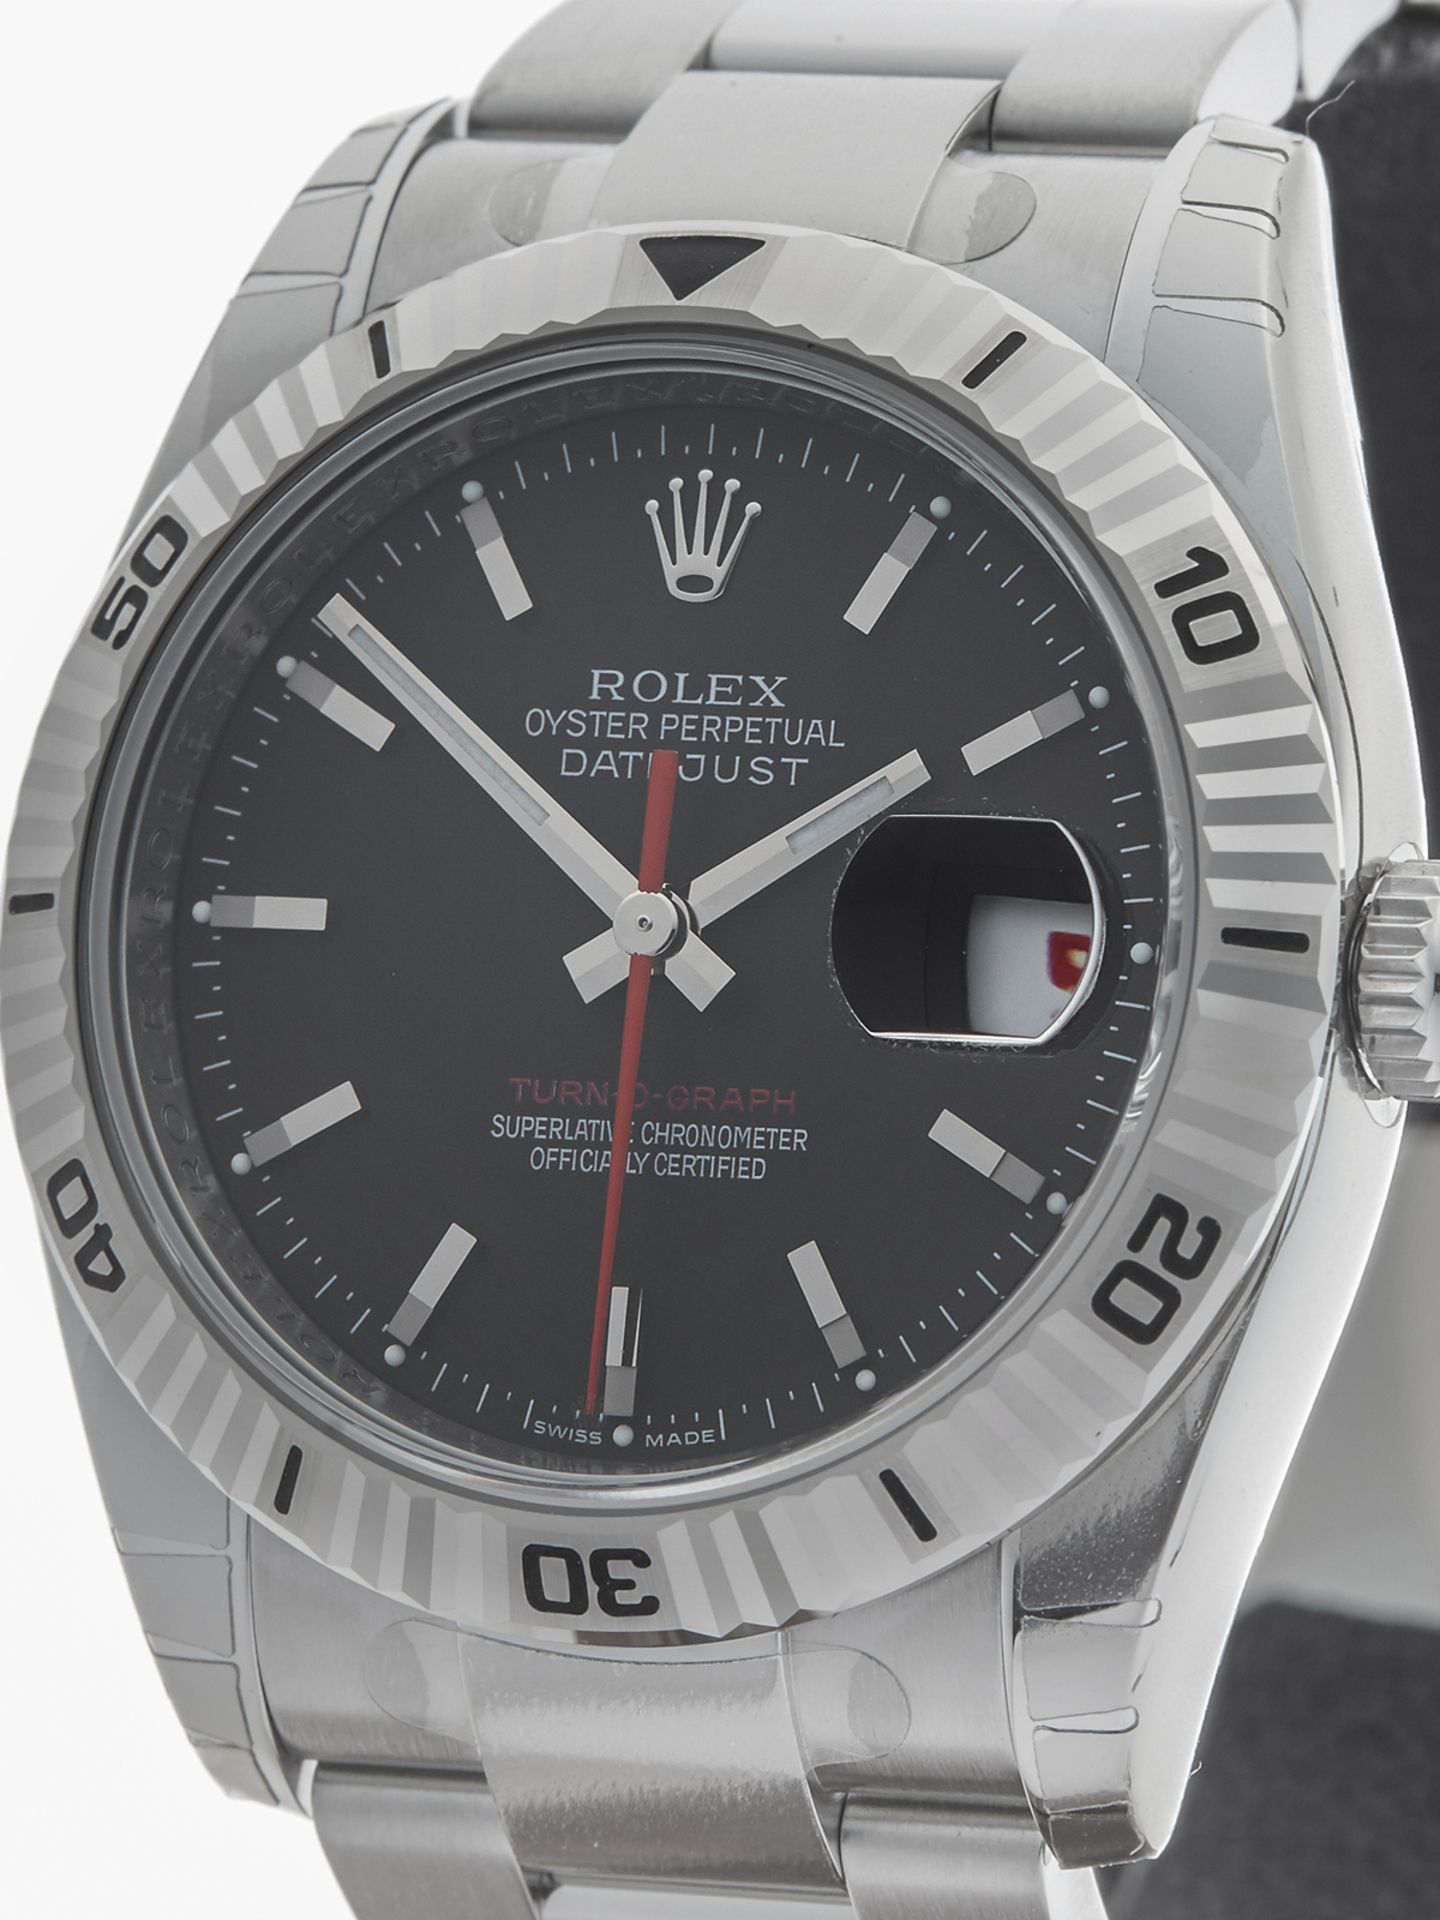 Rolex Datejust Turn-O-Graph 36mm Stainless Steel 116264 - Image 3 of 8